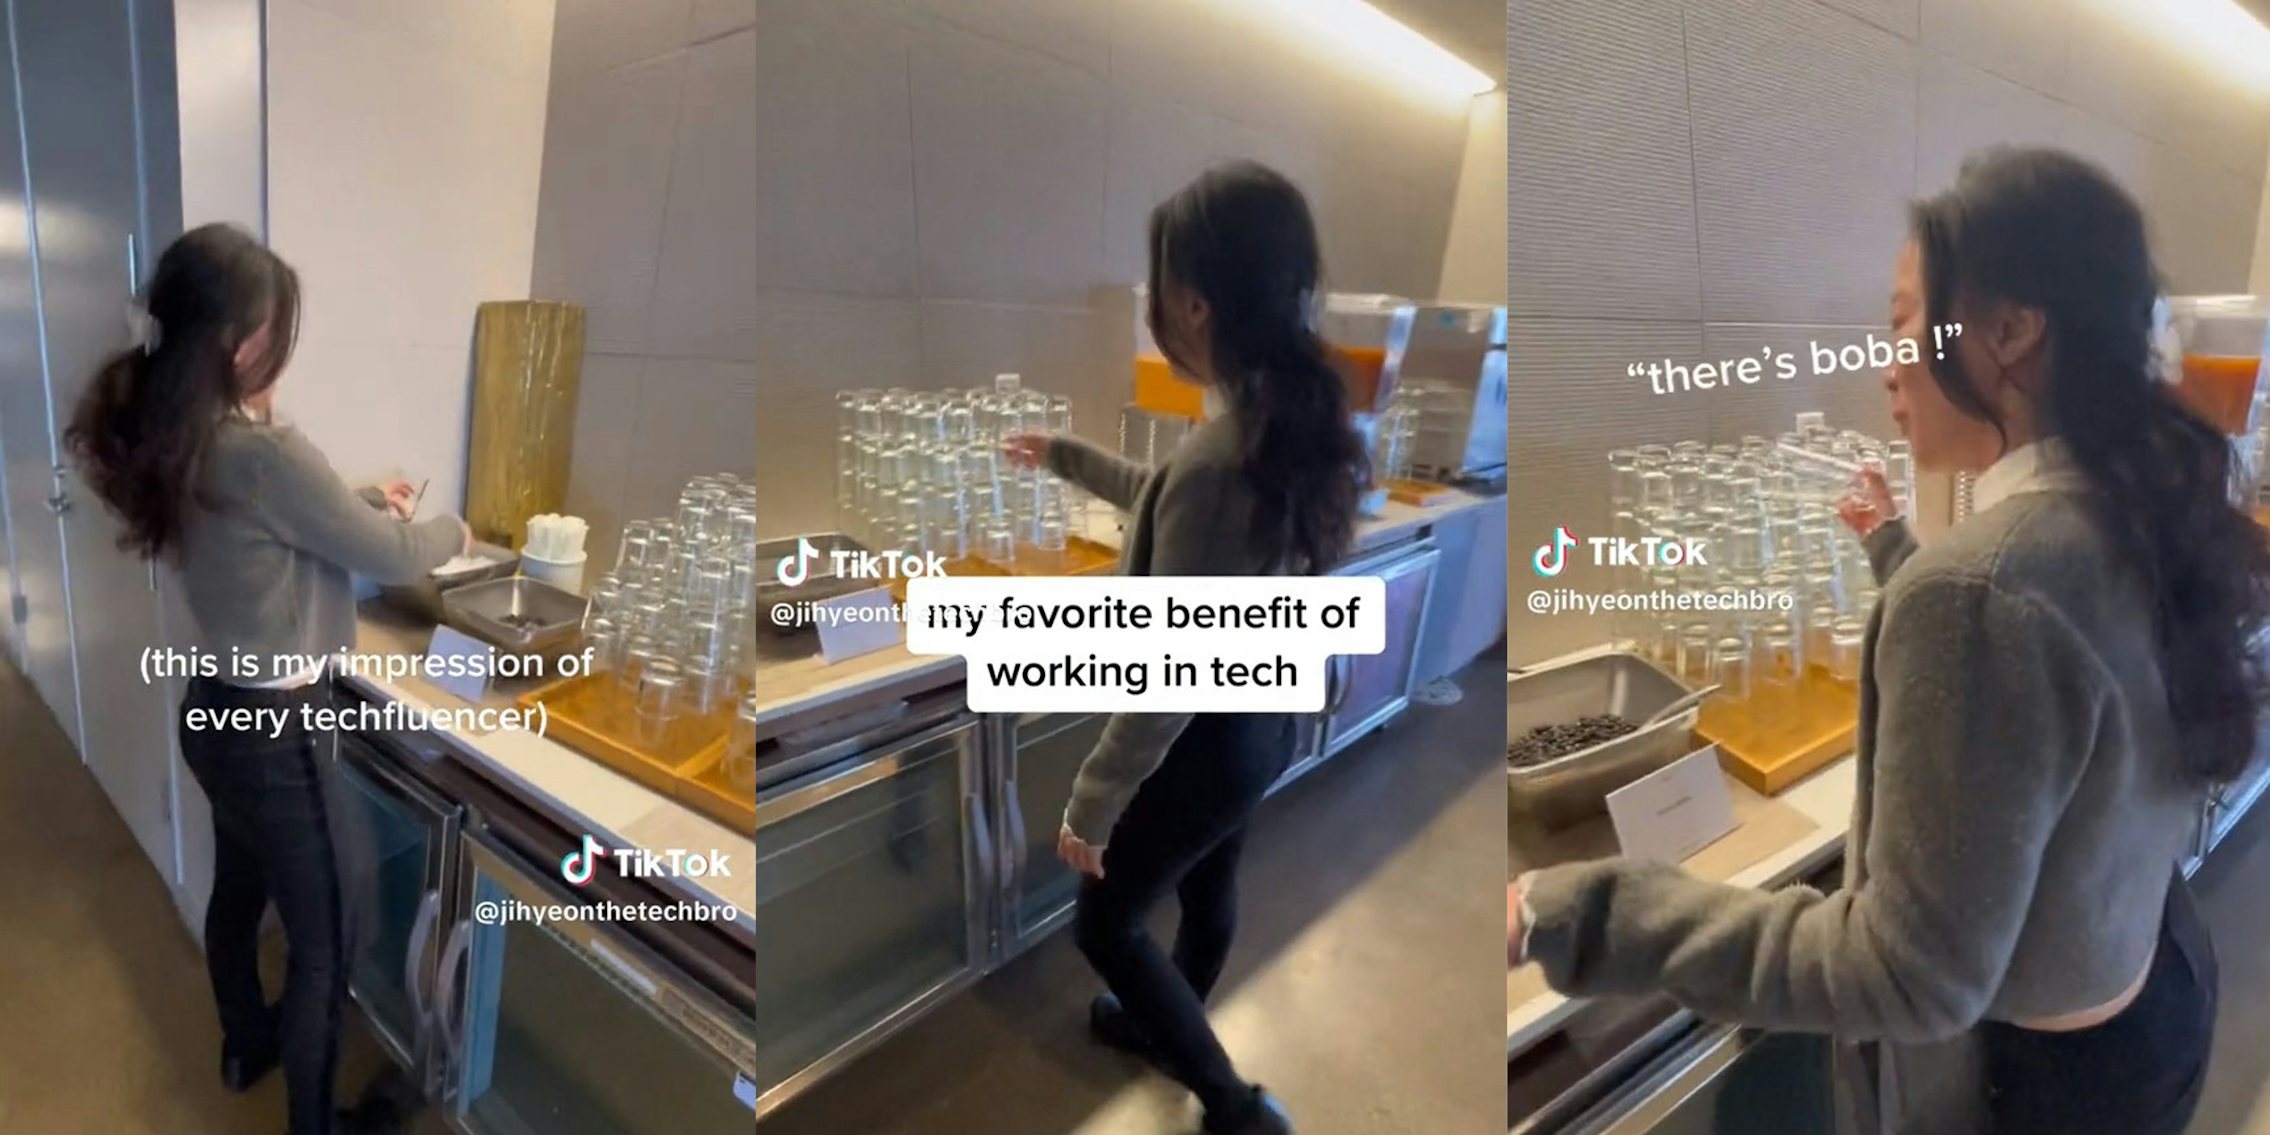 Tech worker shows off boba station at workplace